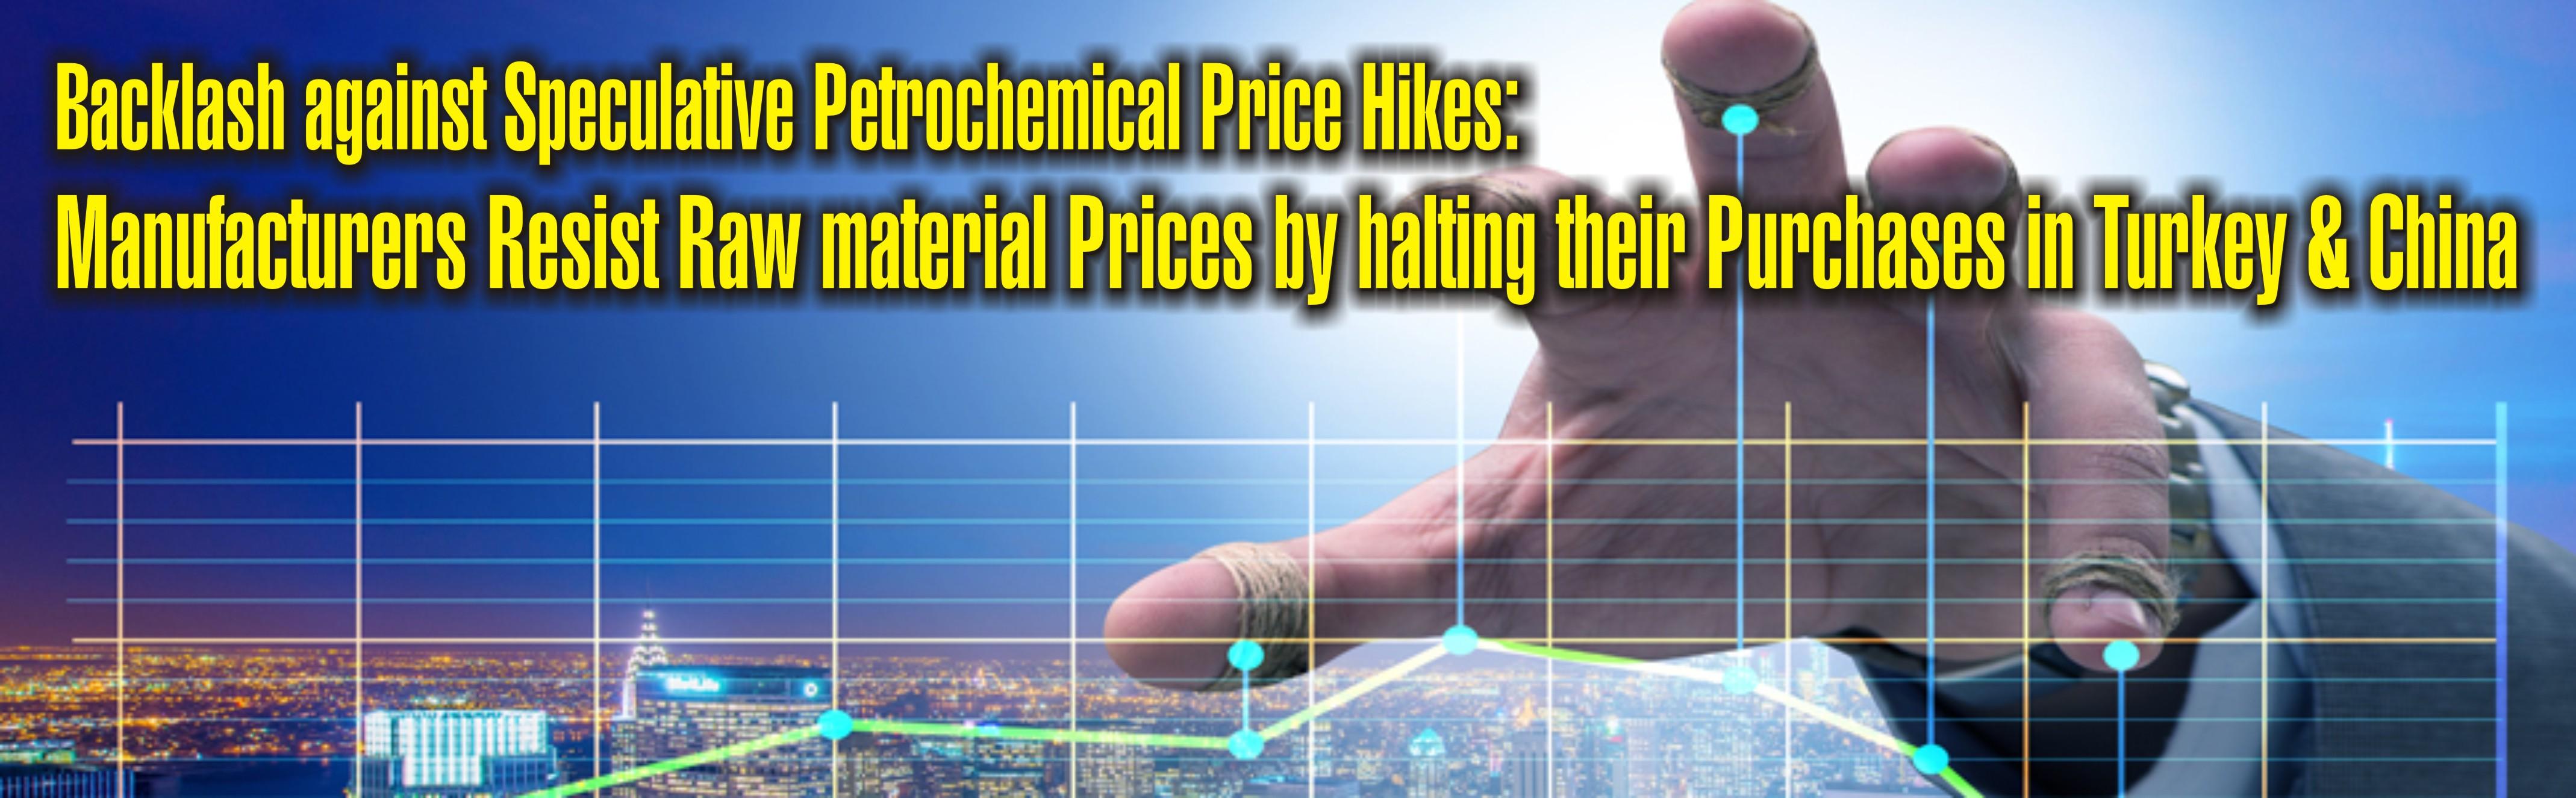 Backlash against Speculative Petrochemical Price Hikes: Manufacturers Resist Raw material Prices by halting their Purchases in Turkey & China